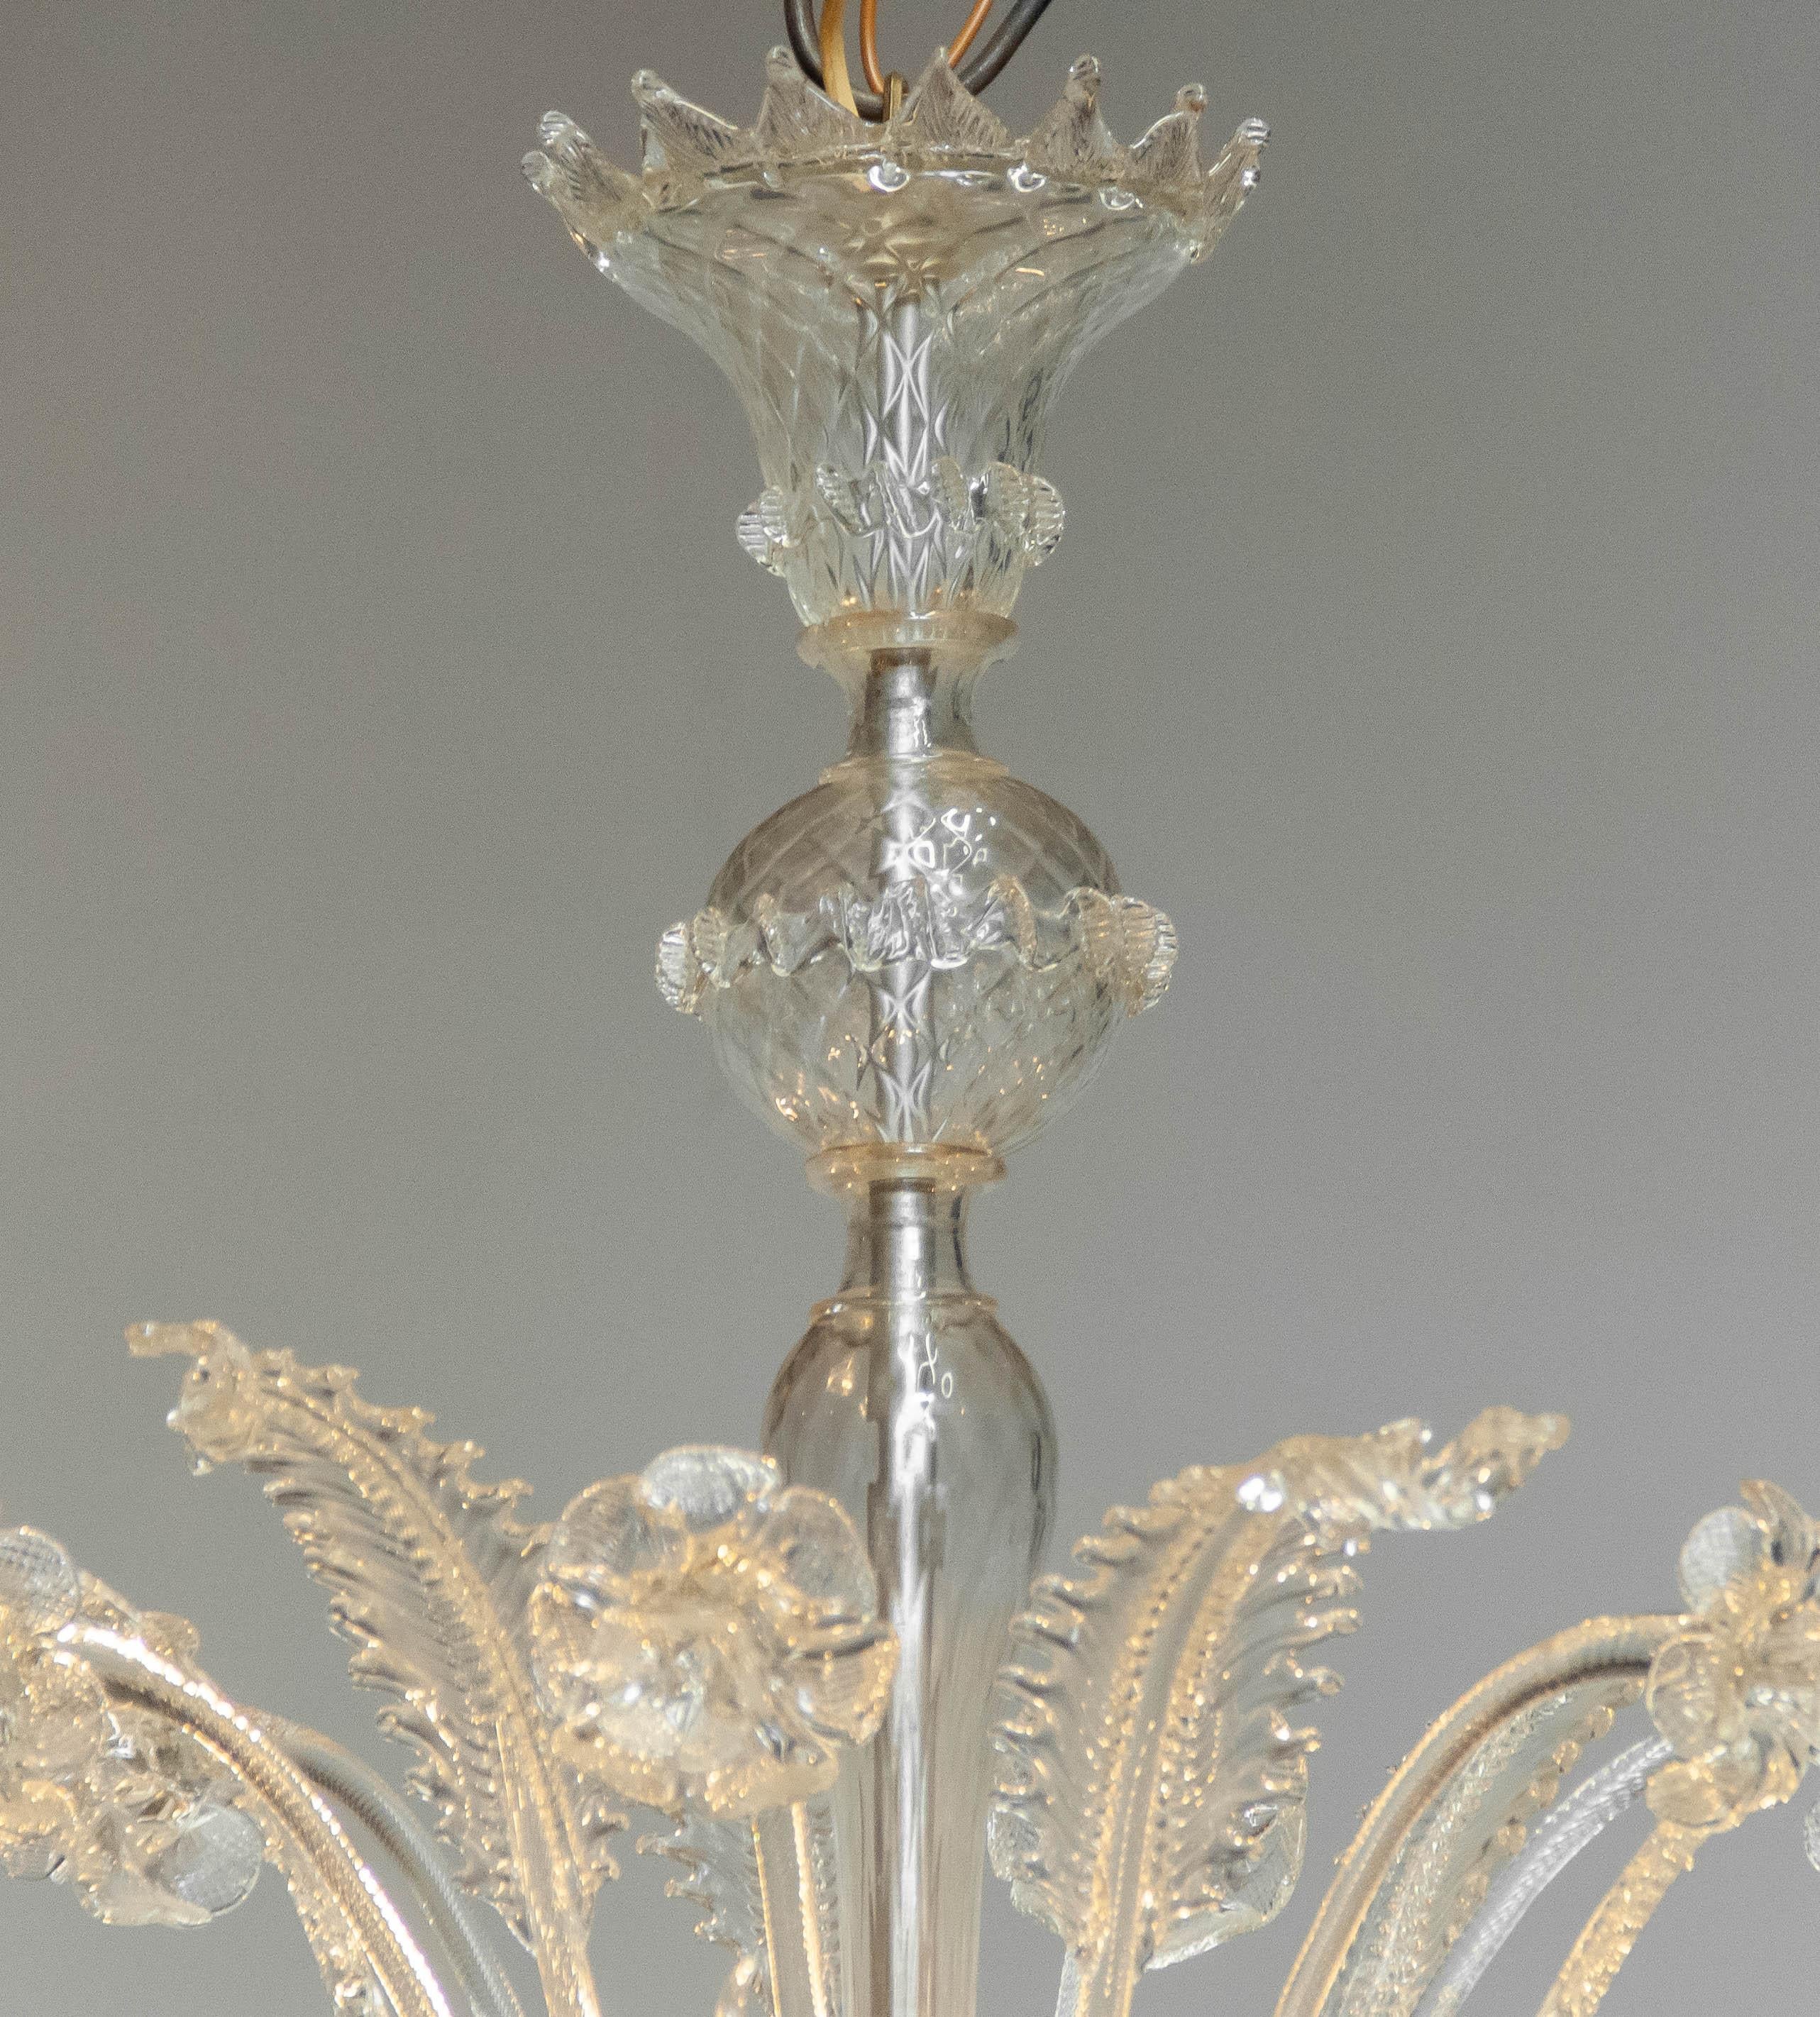 Italian 1940's Large Clear Art Glass Murano Barrochi Chandelier by Barovier & Toso Italy For Sale